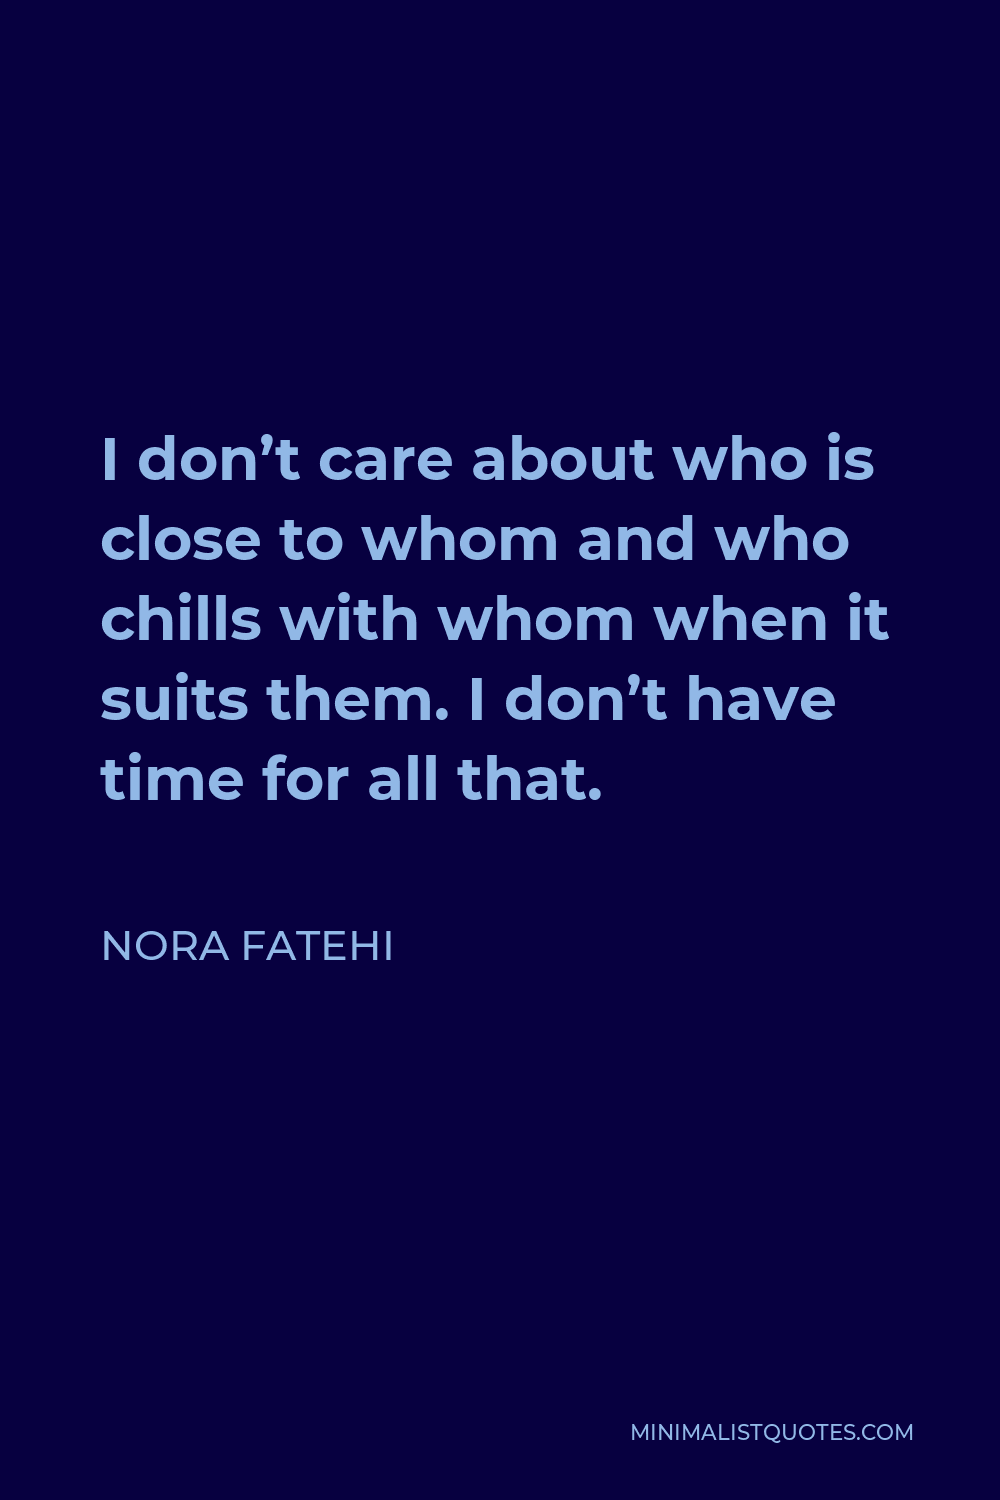 Nora Fatehi Quote - I don’t care about who is close to whom and who chills with whom when it suits them. I don’t have time for all that.